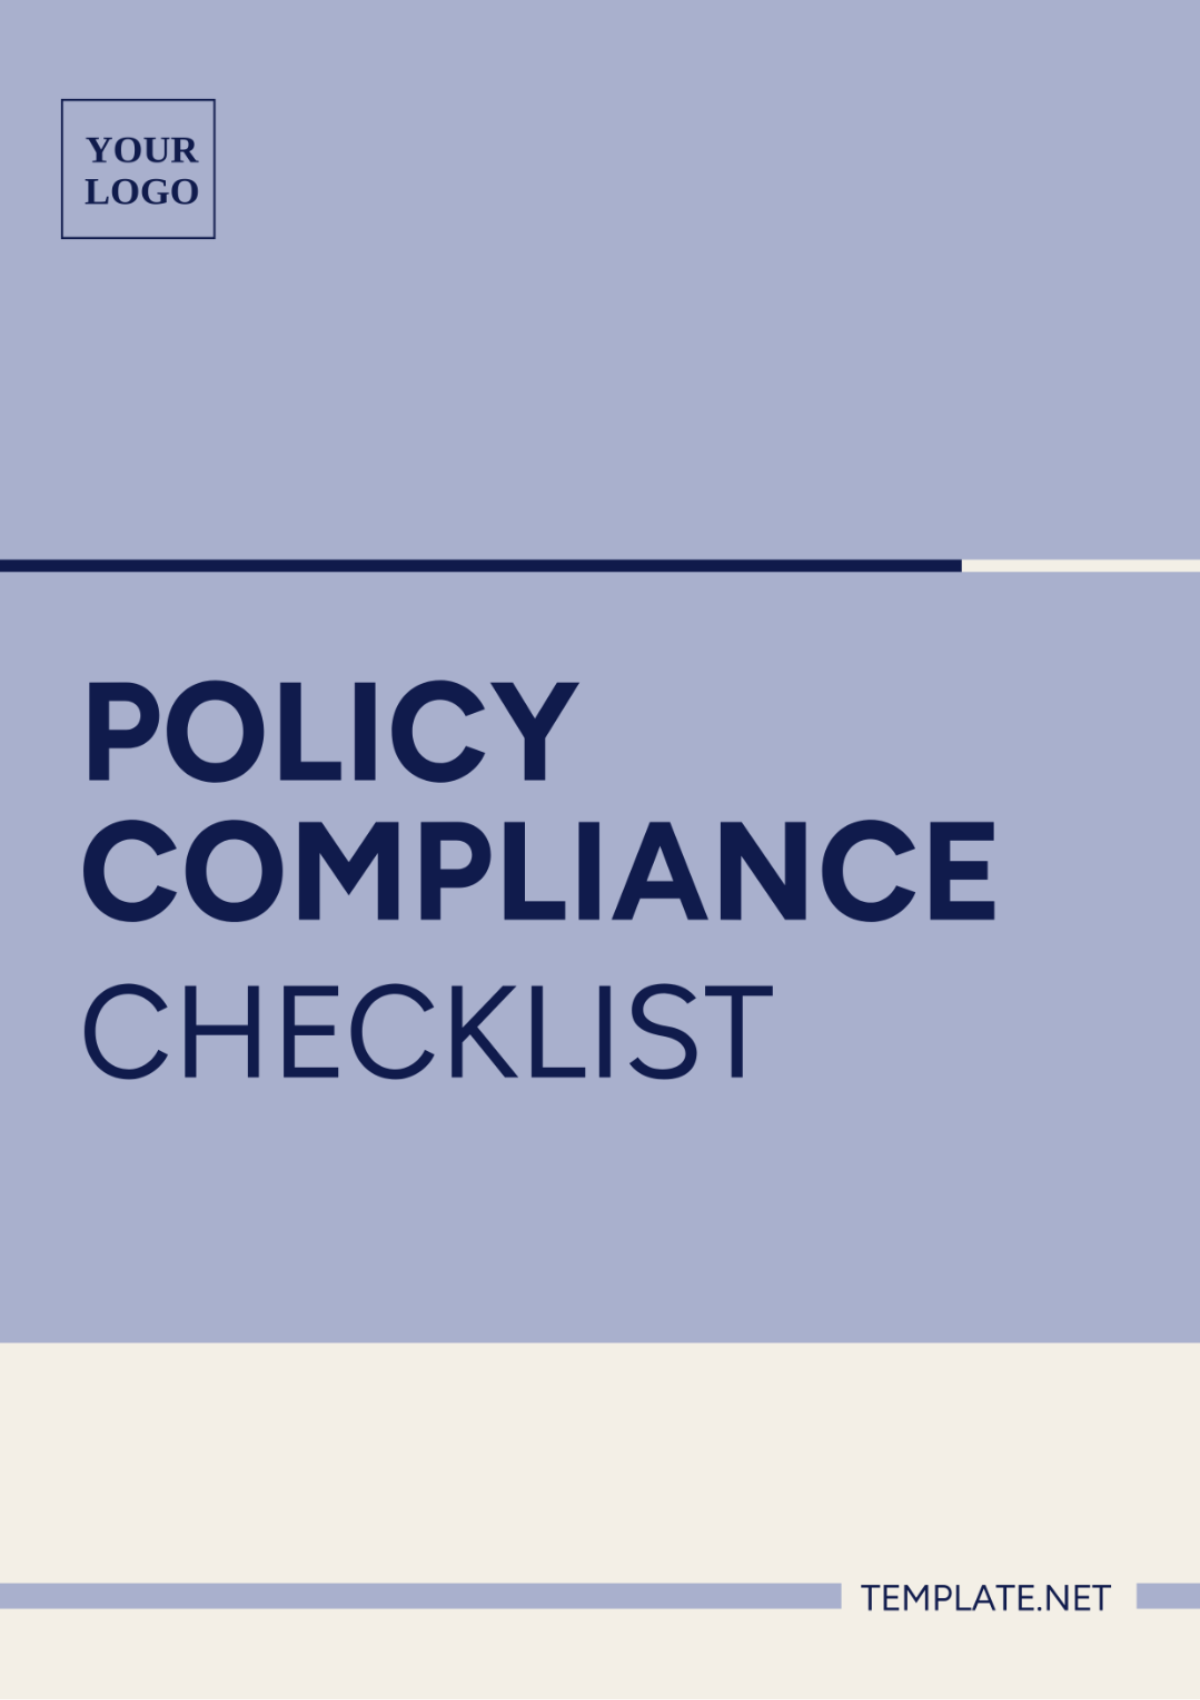 Policy Compliance Checklist Template